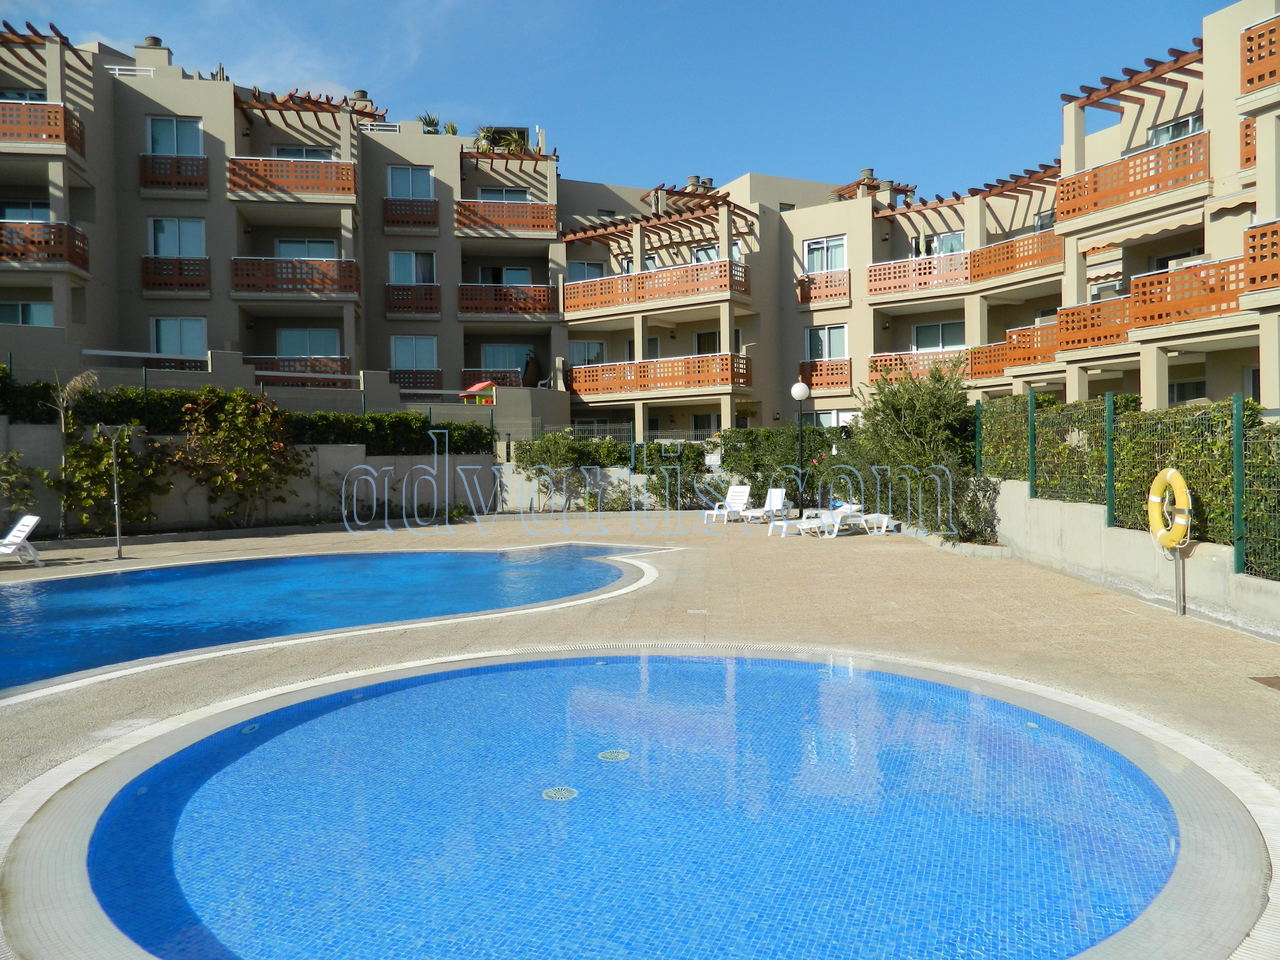 1 bedroom apartment for sale in Sotavento, Tenerife €175.000